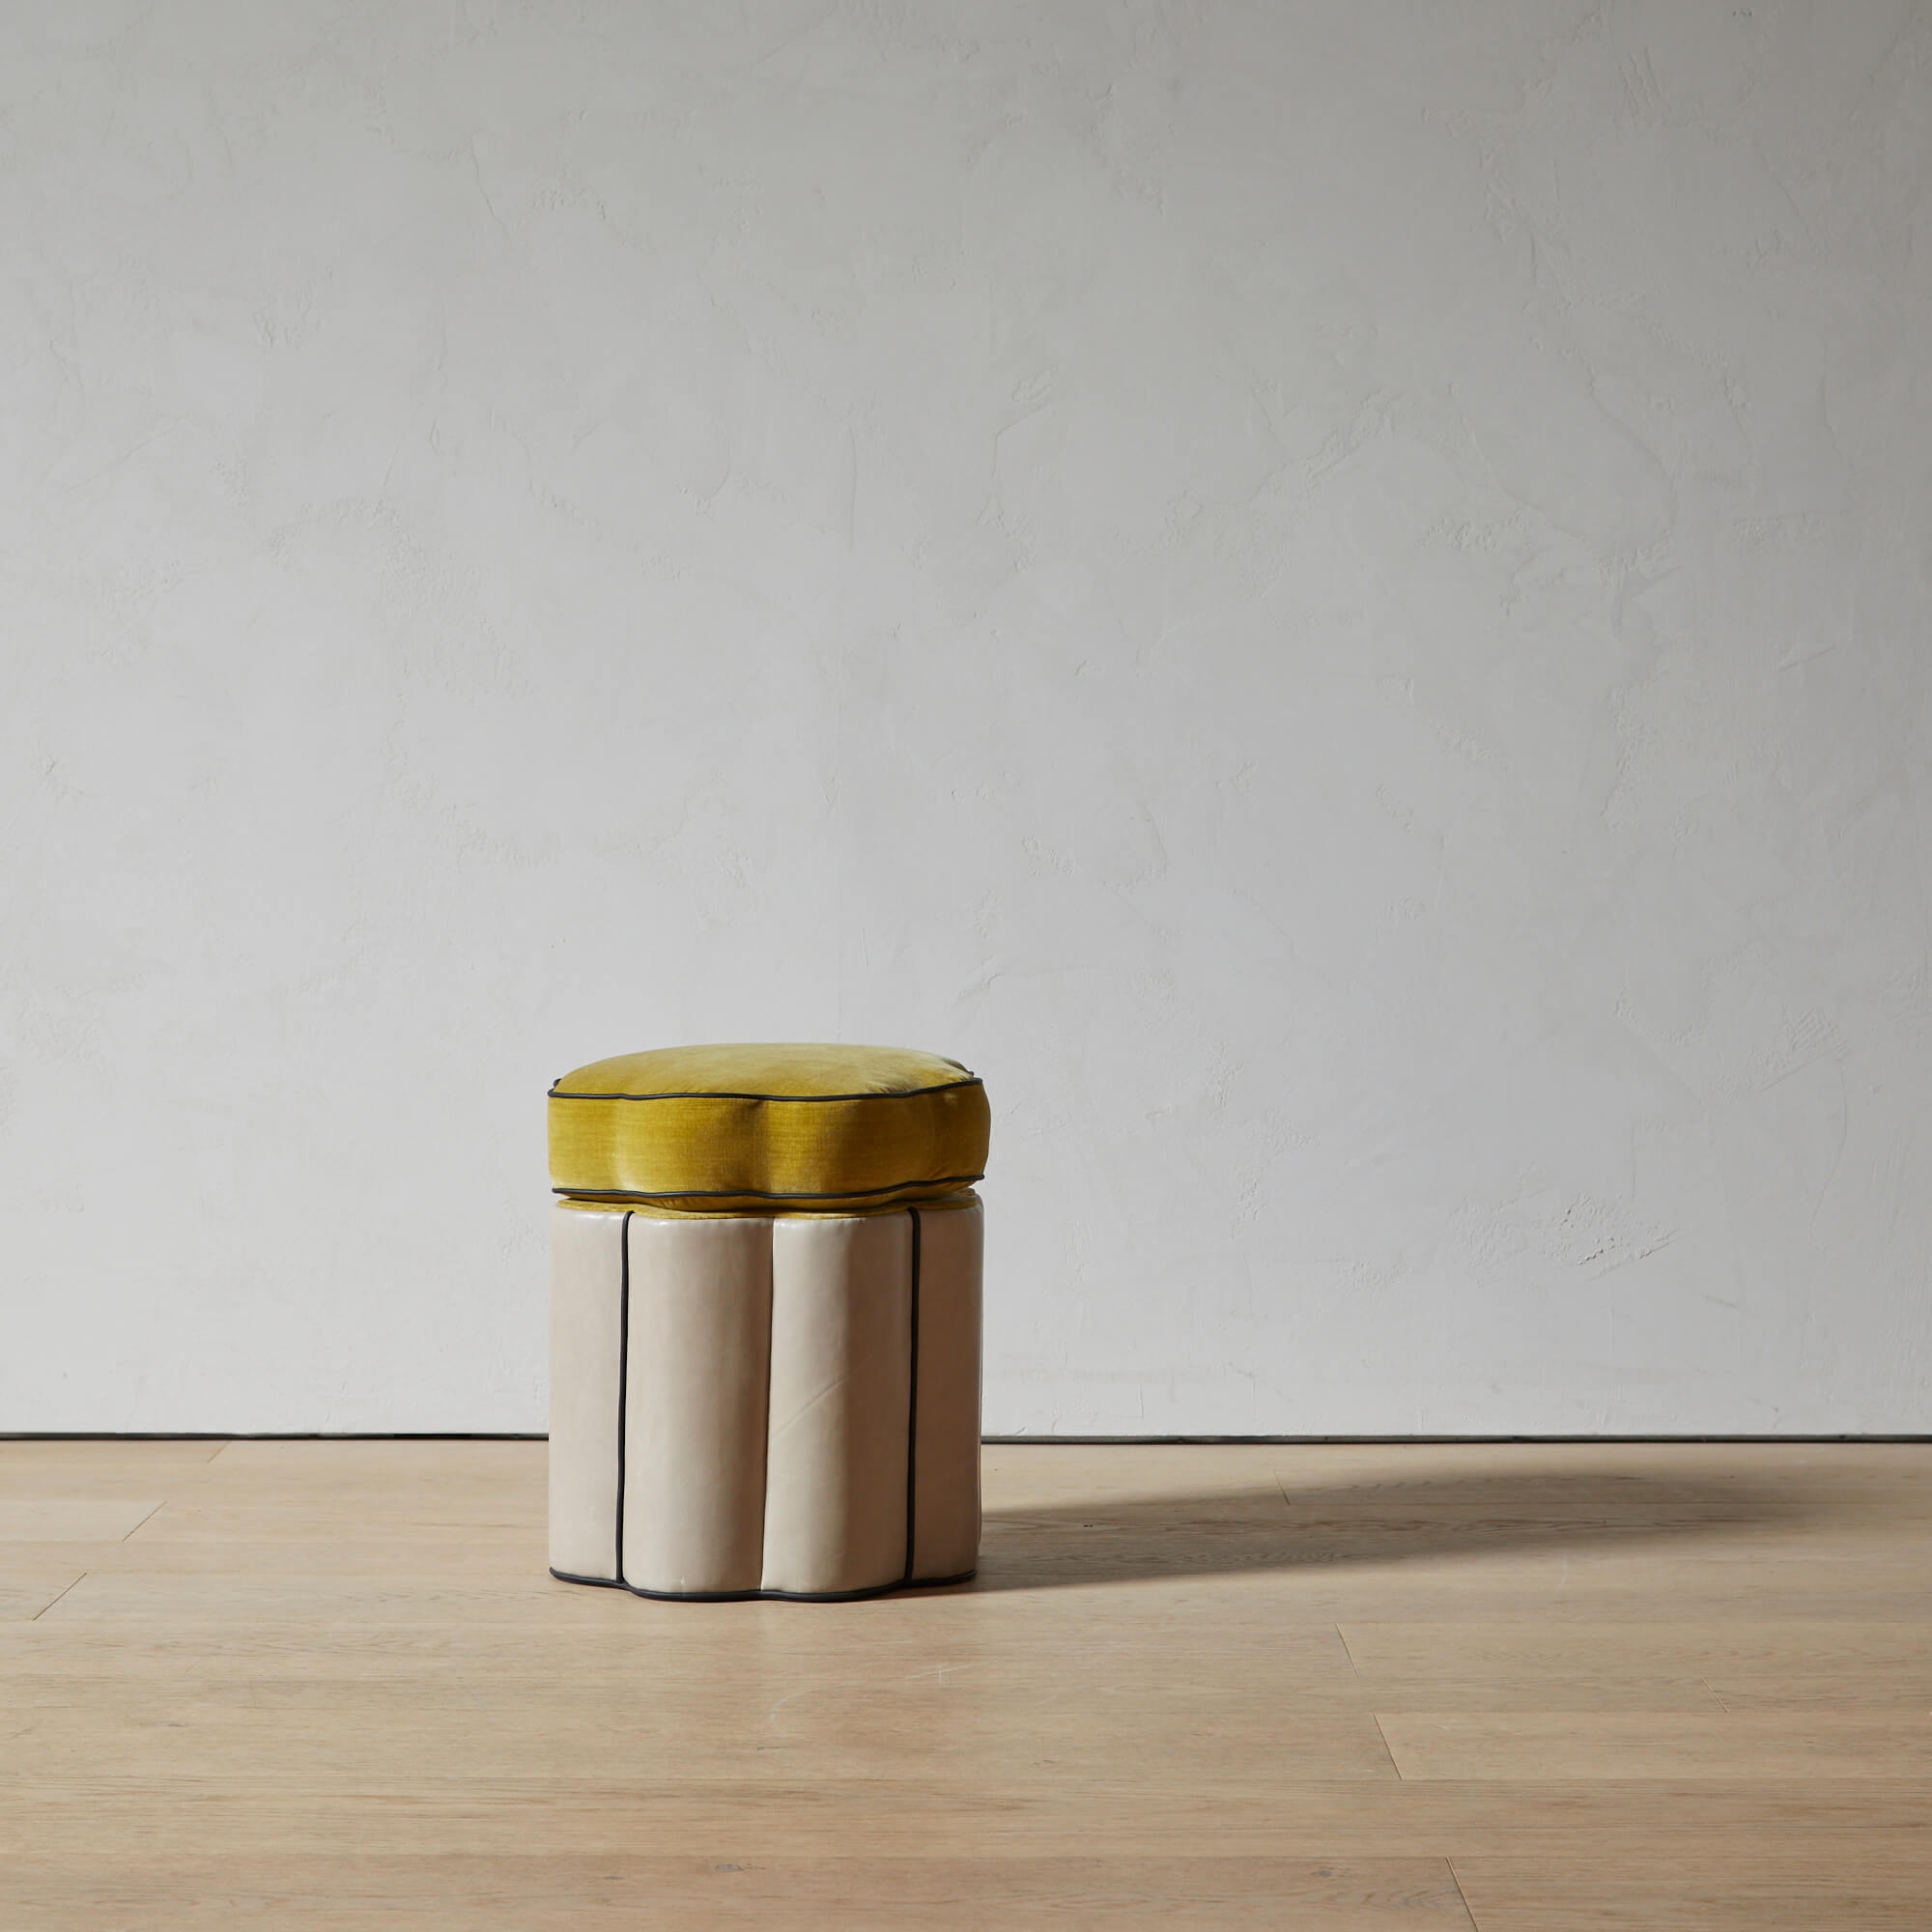 The Bellhop Stool by Lawton Mull